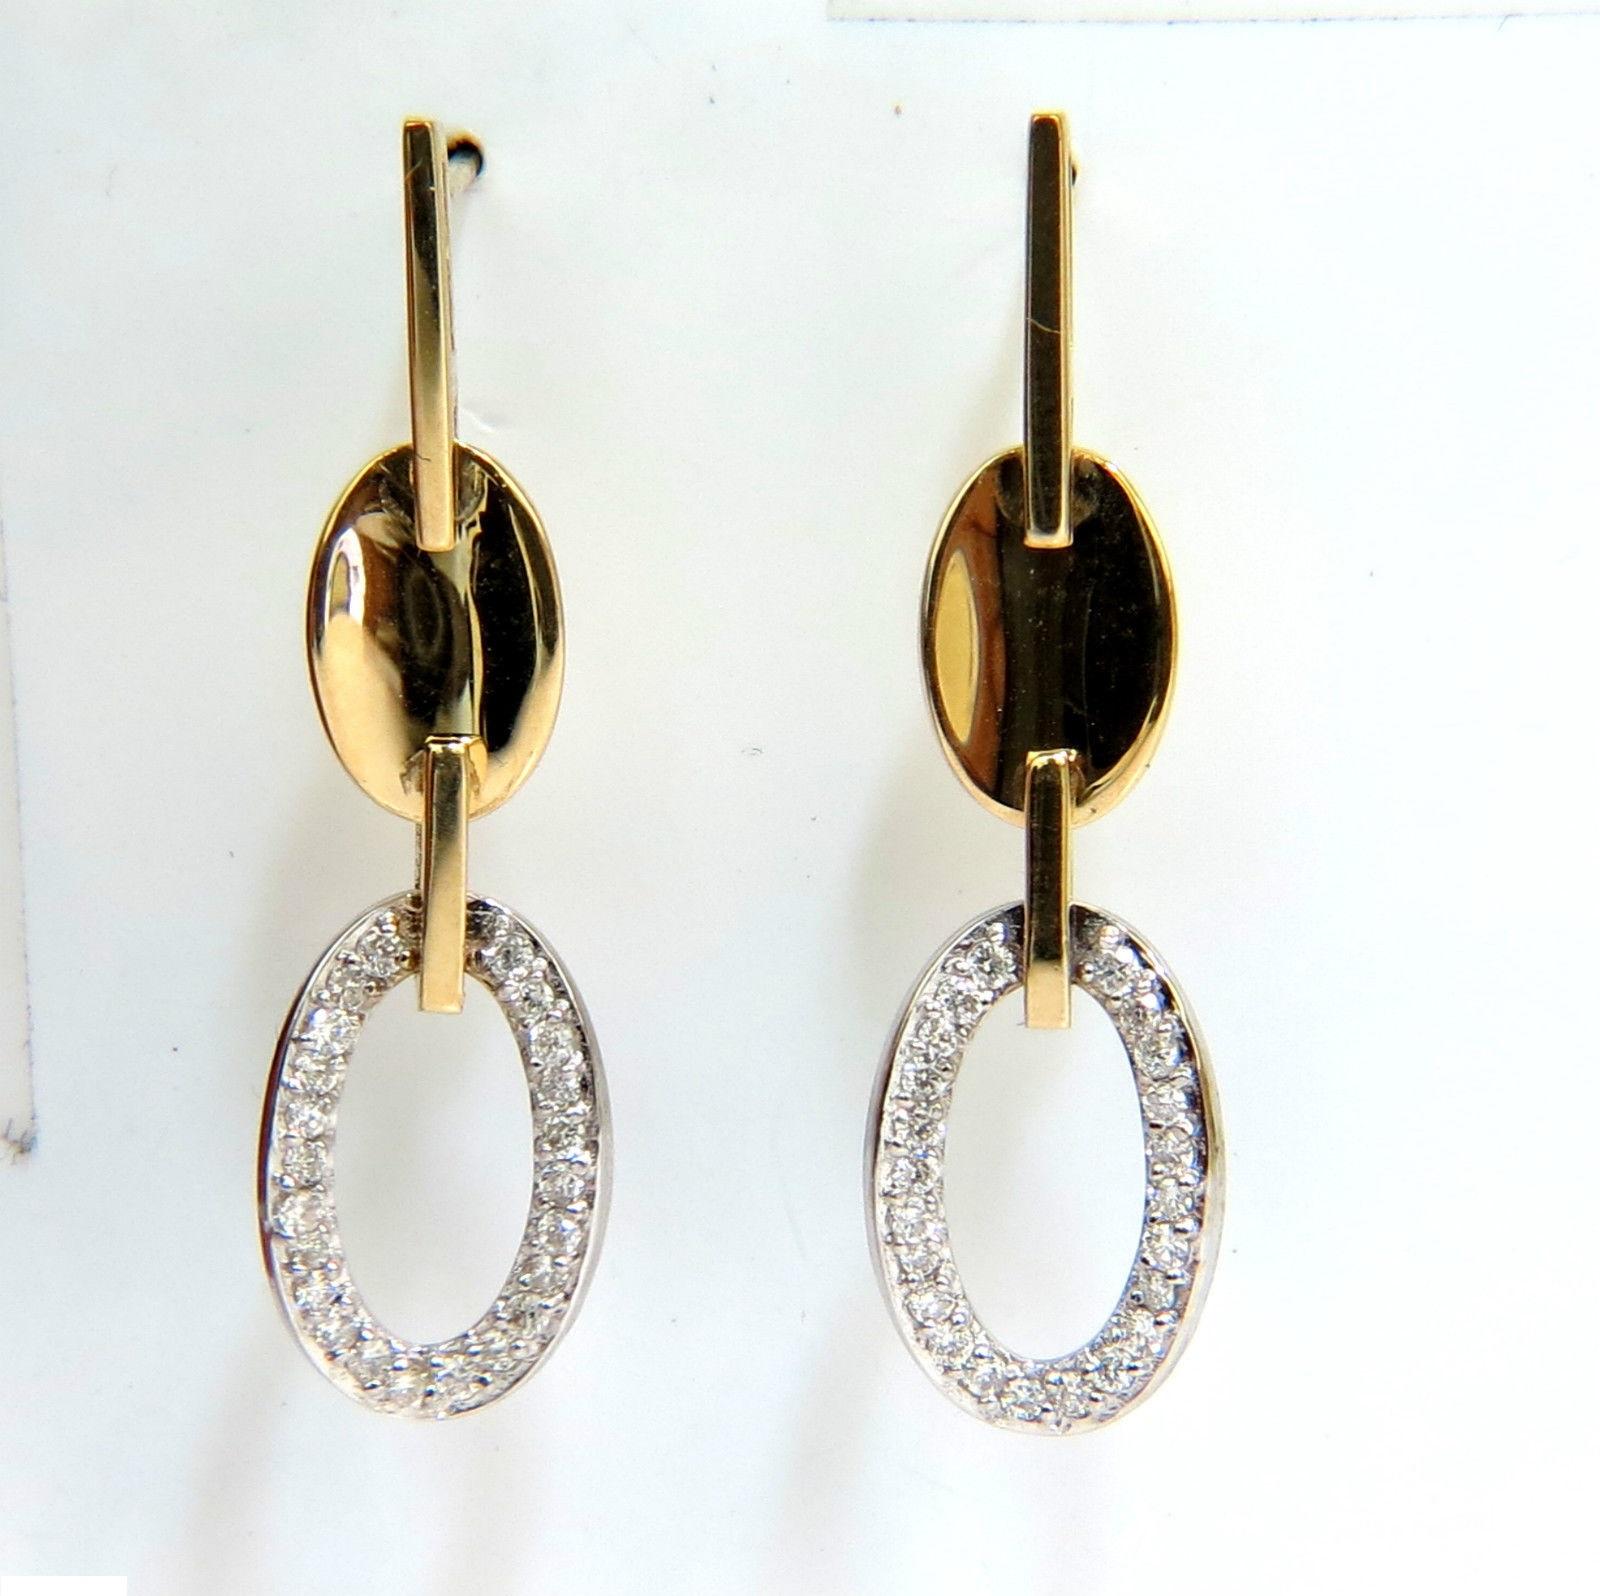 Dangle Perfection!

Two toned. 

.40ct. diamonds

Rounds, full brilliant cuts

Bead set, pave.

Vs-2 clarity.

F-G color. 

14kt. White & Yellow gold.

3.7 Grams.



Overall measurements:

1.3 inch long.

.35 inch wide at Lower Dangle.



Modern